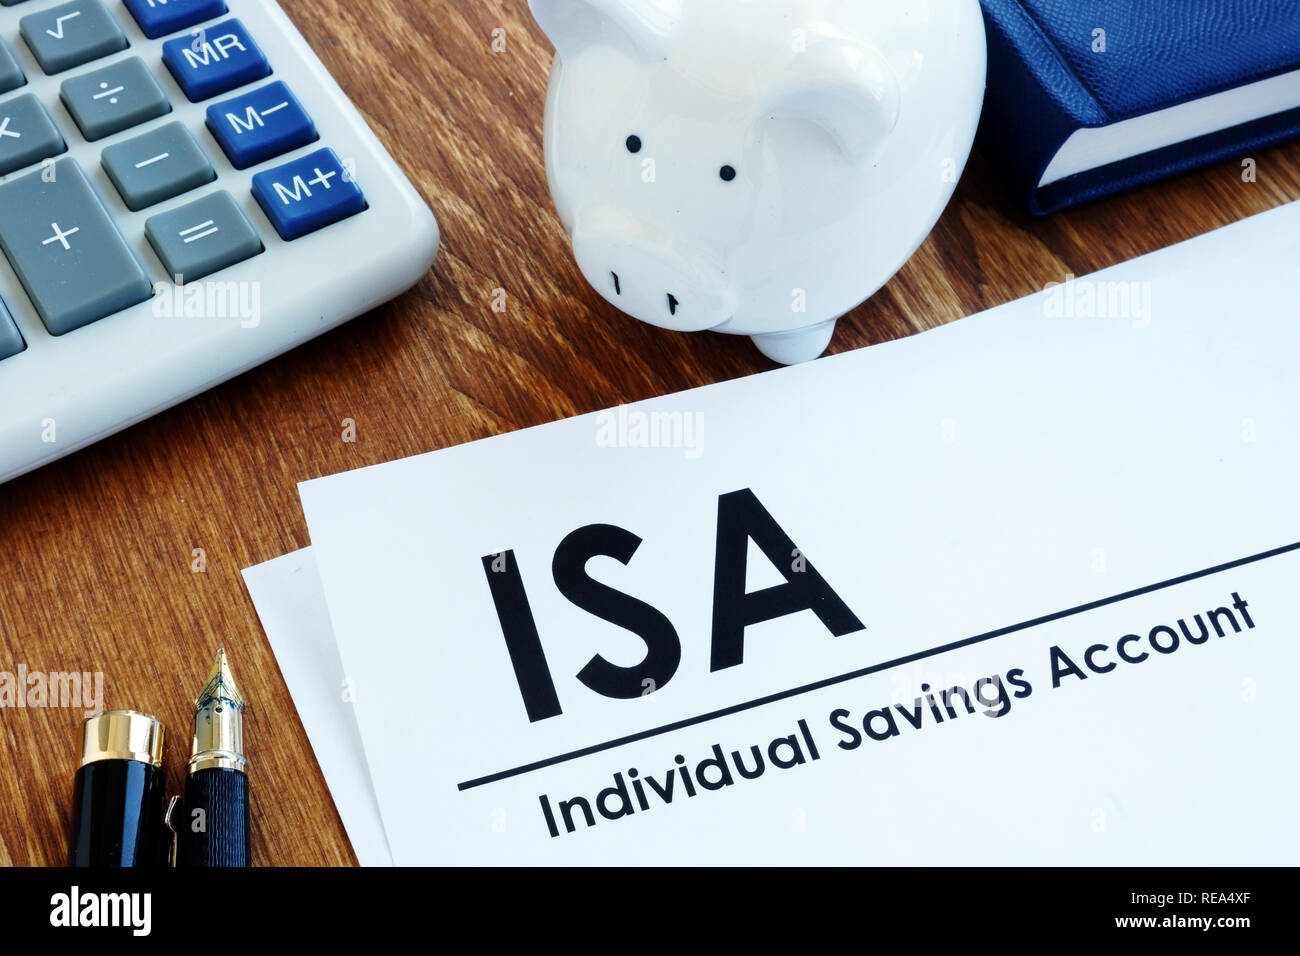 Documents about ISA Individual Savings Account and pen. Stock Photo